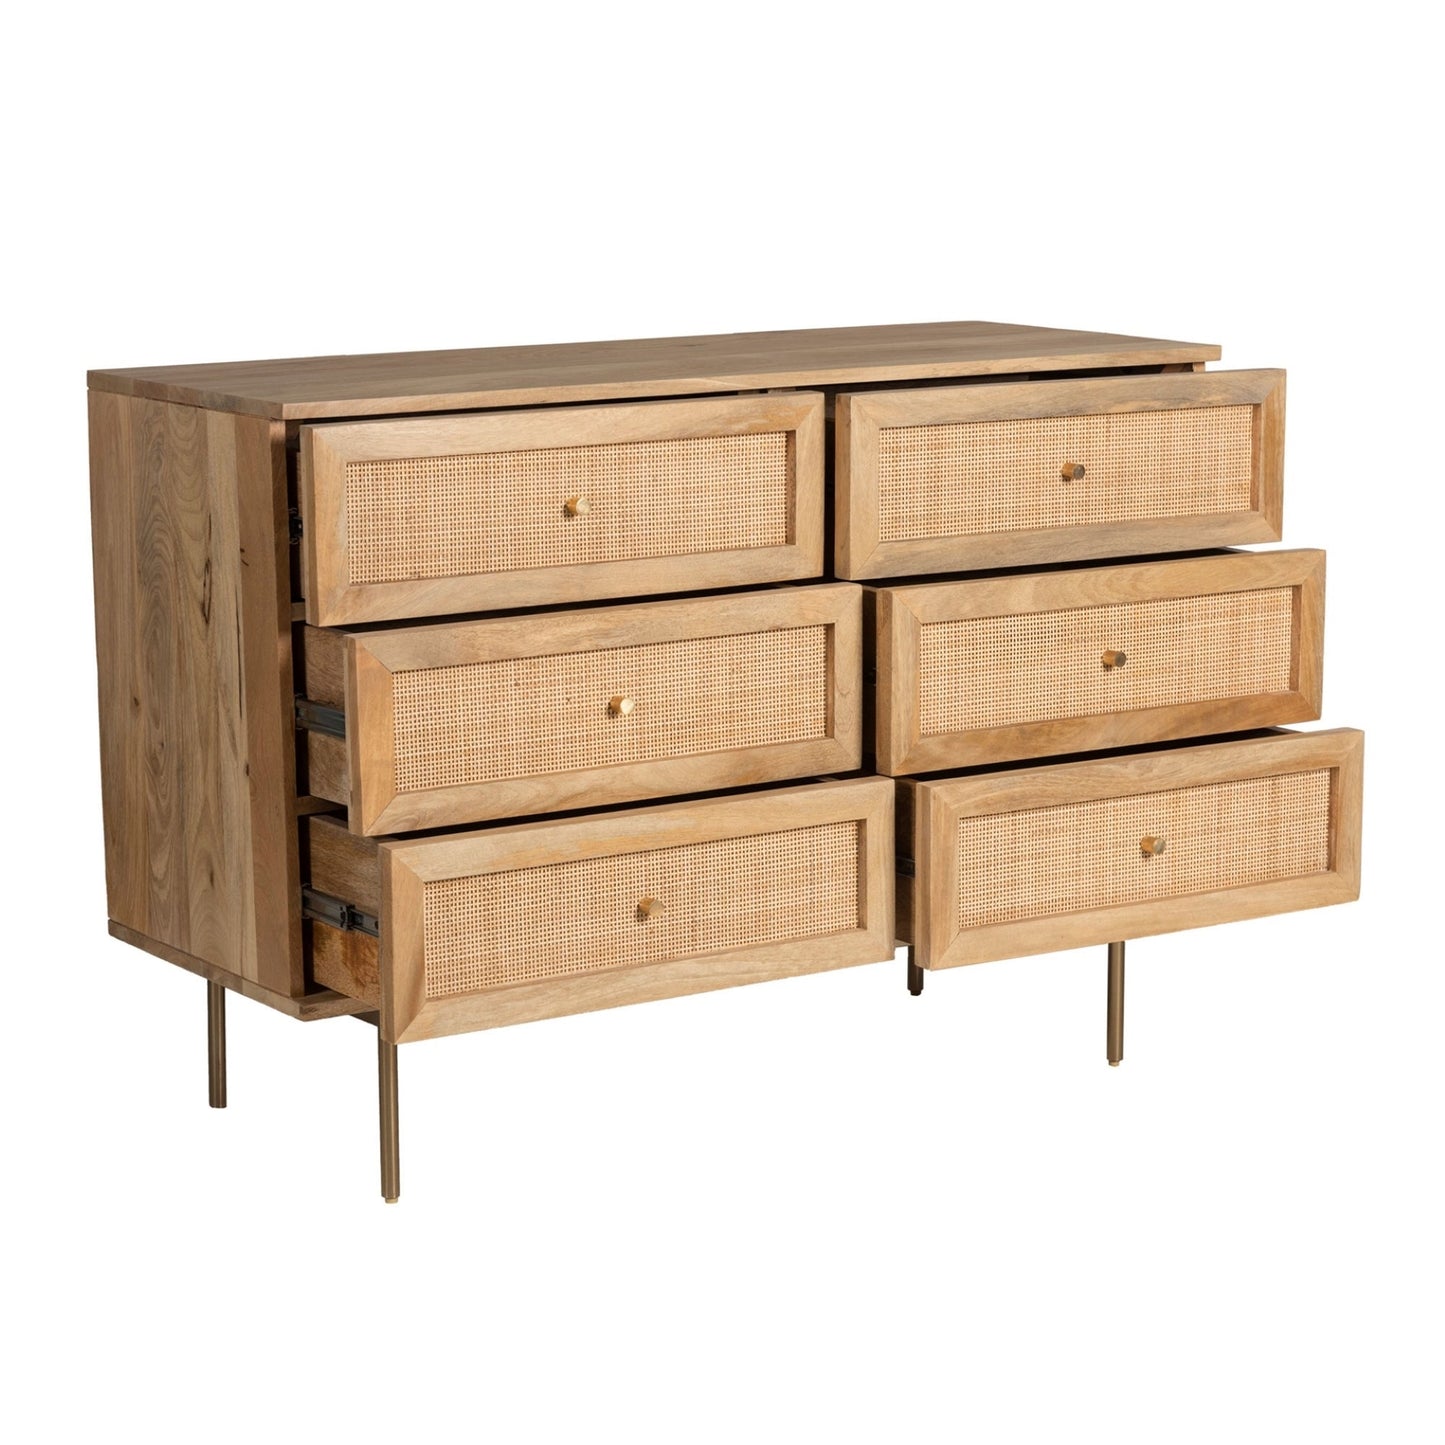 20% off, SP0110O, Raphia Wide Chest Of Drawers, 6 Drawers,